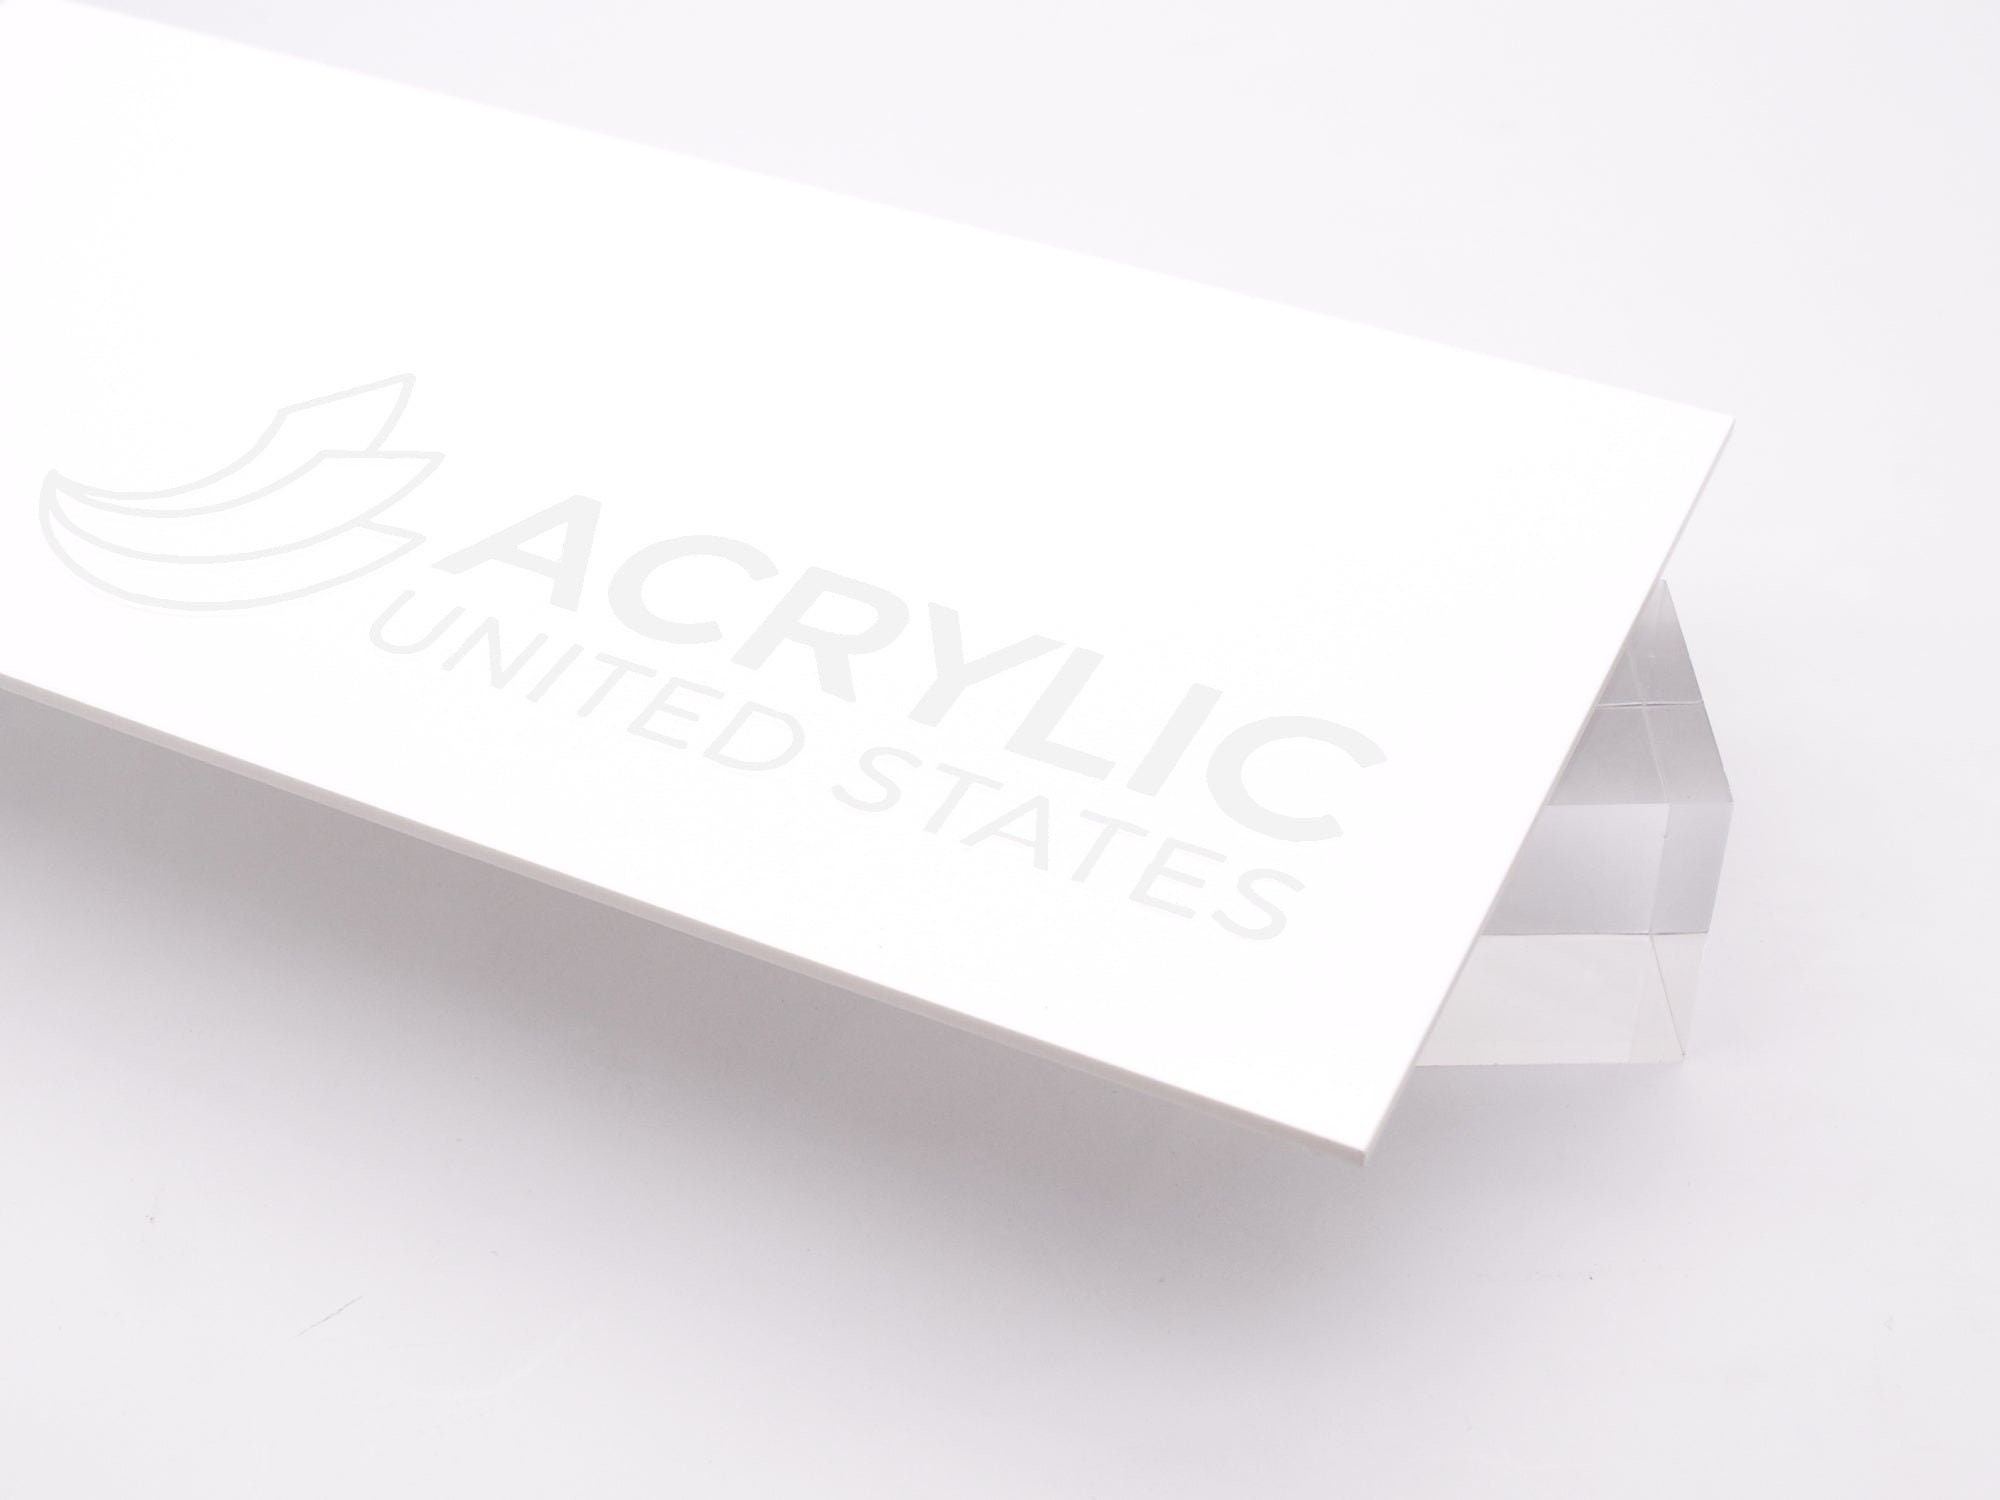 CLEAR ACRYLIC, DOUBLE Sided, Sublimation Blank , Sheet Stock - 1/8 Thick  11.5 x 19 Glowforge Material, Laser Material, Diy, Sublimation